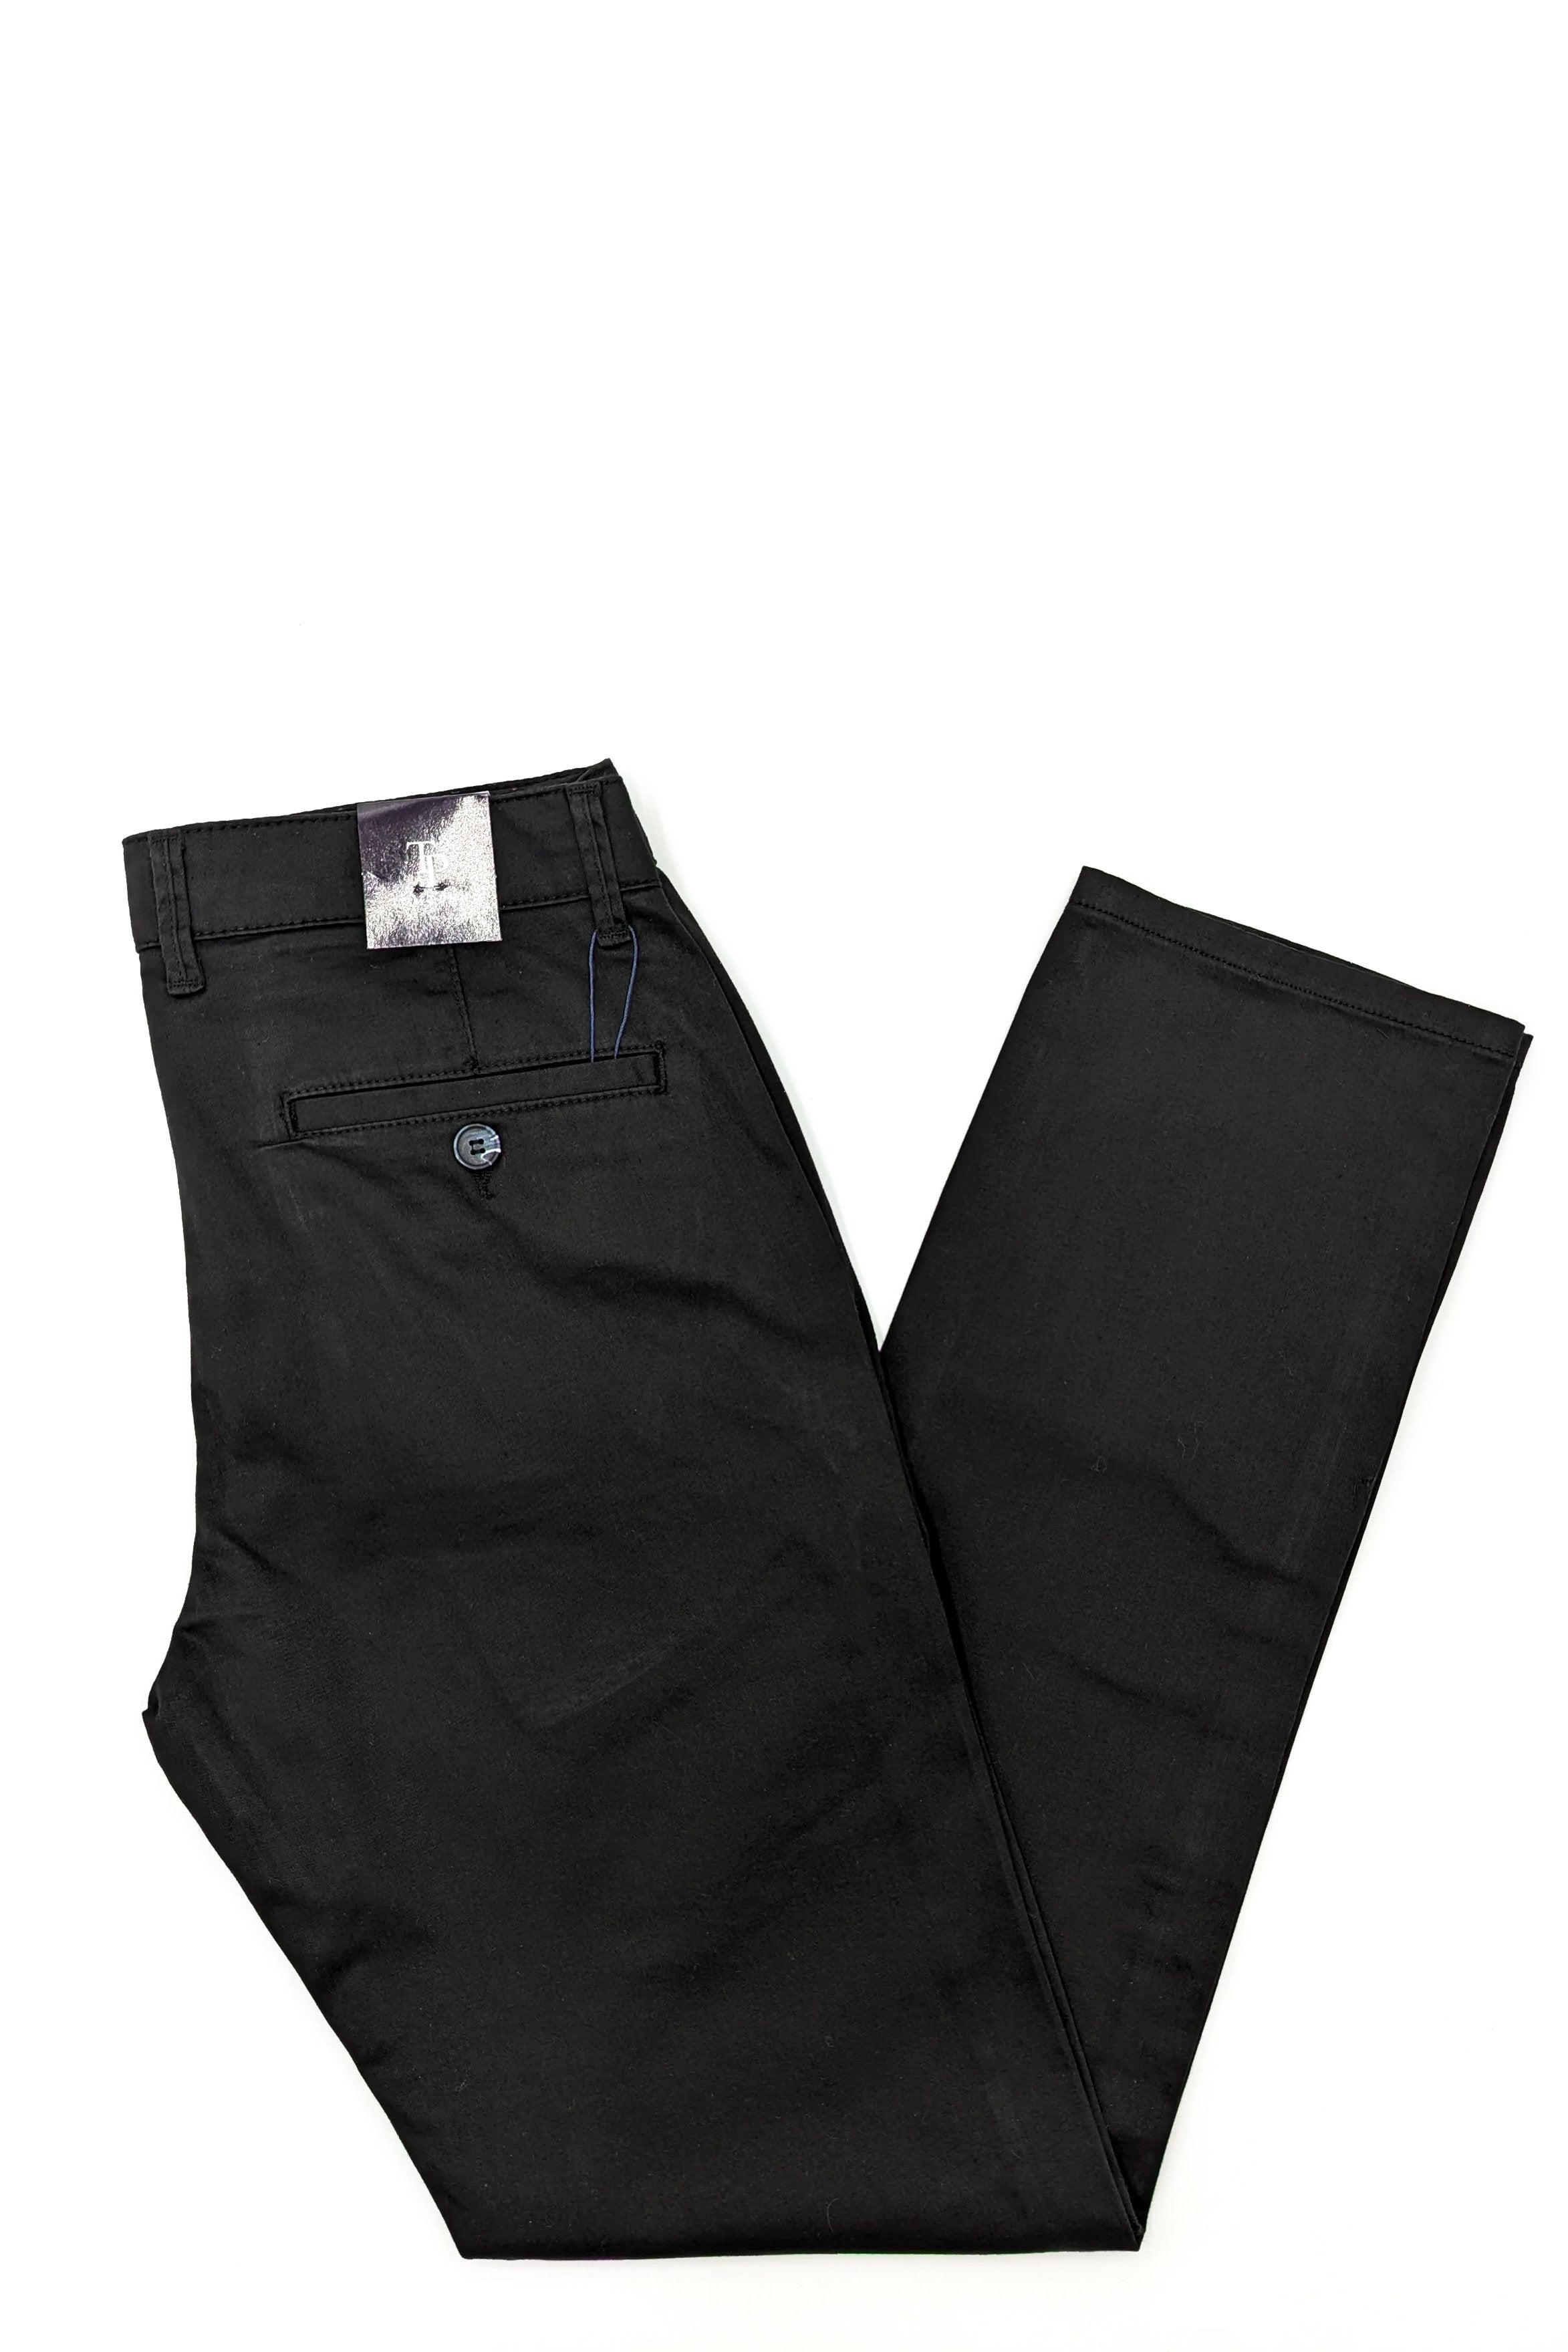 Tom Penn Tapered Fit Black Chino